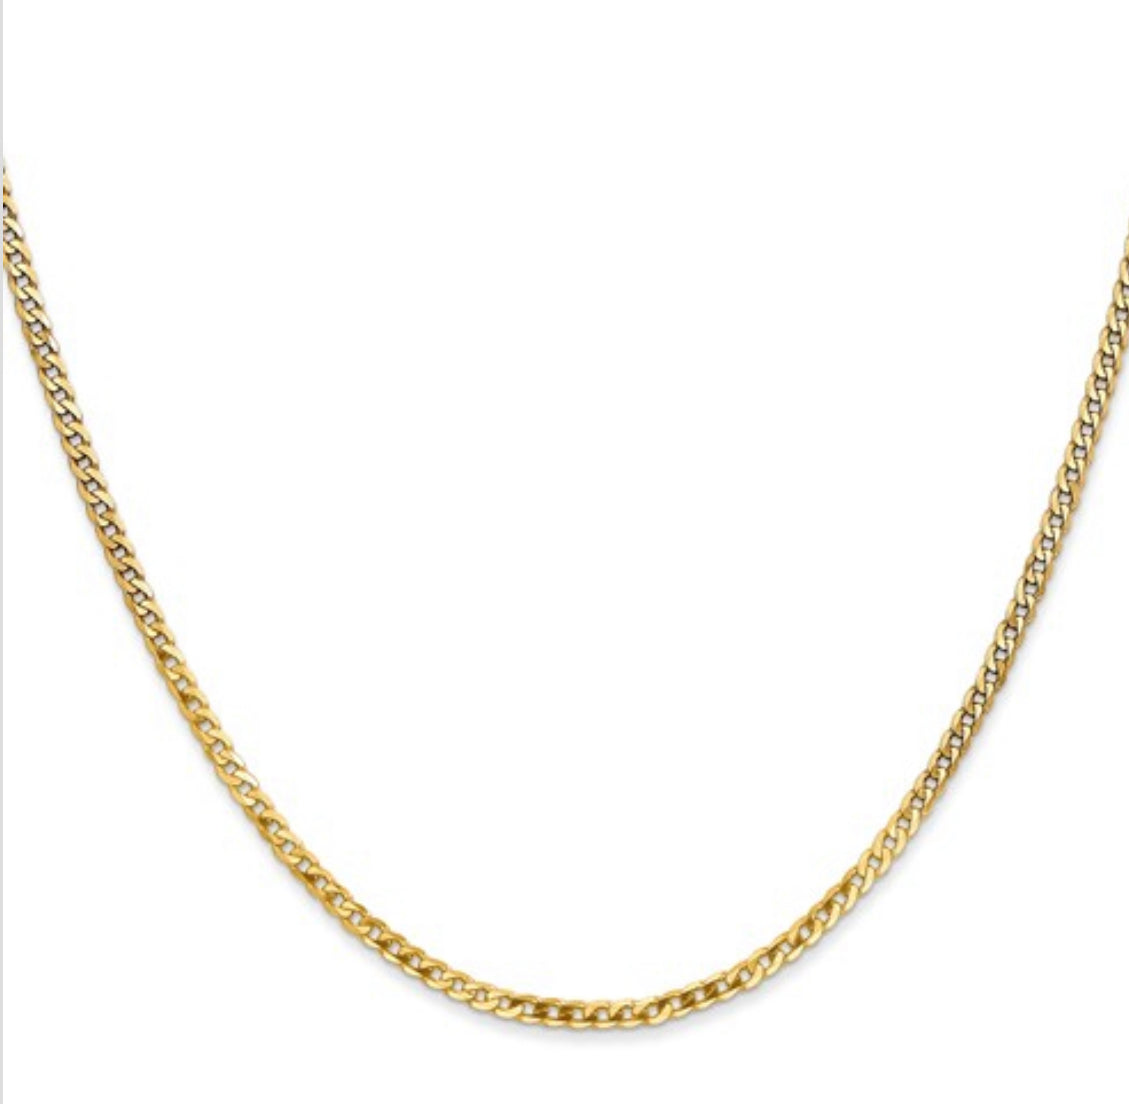 10K Yellow Gold Flat Beveled Curb Chain - 6.1mm